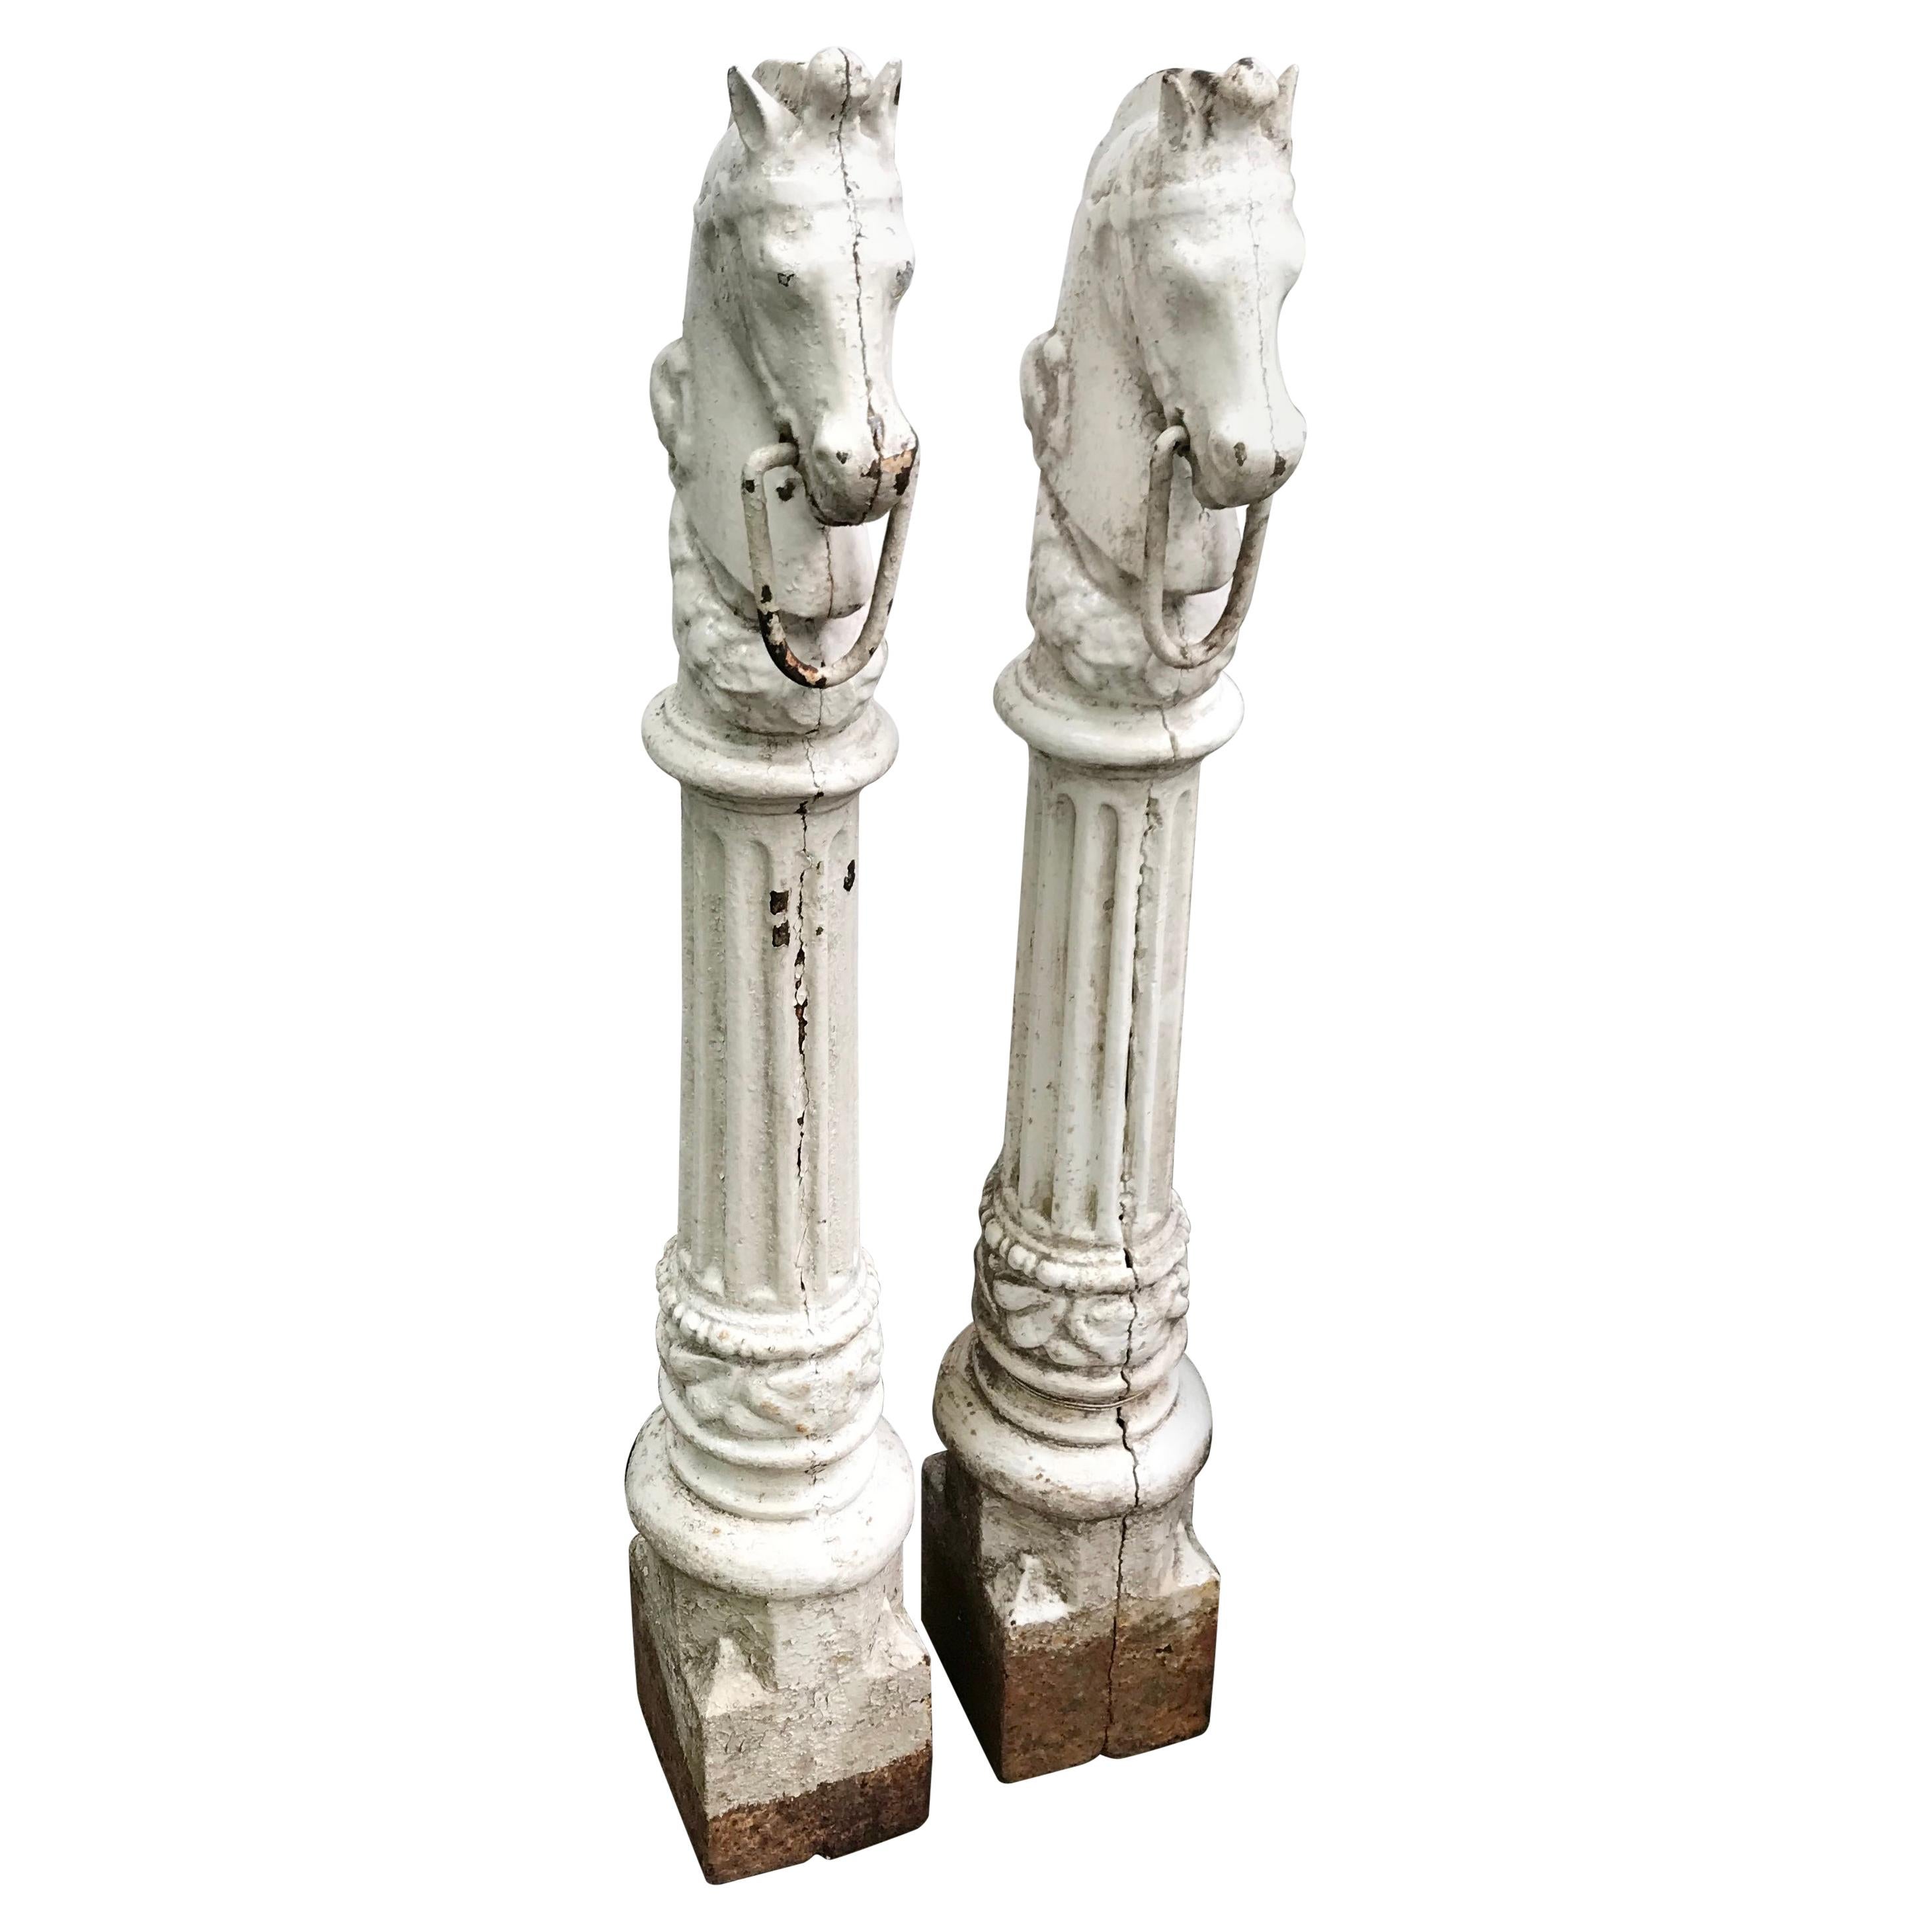 Pair of horse head hitching posts. Superb pair antique painted cast iron hitching posts with horse heads with moveable horse bits on garlanded fluted columnar shafts on modeled plinth bases. Original painted condition with some areas of later